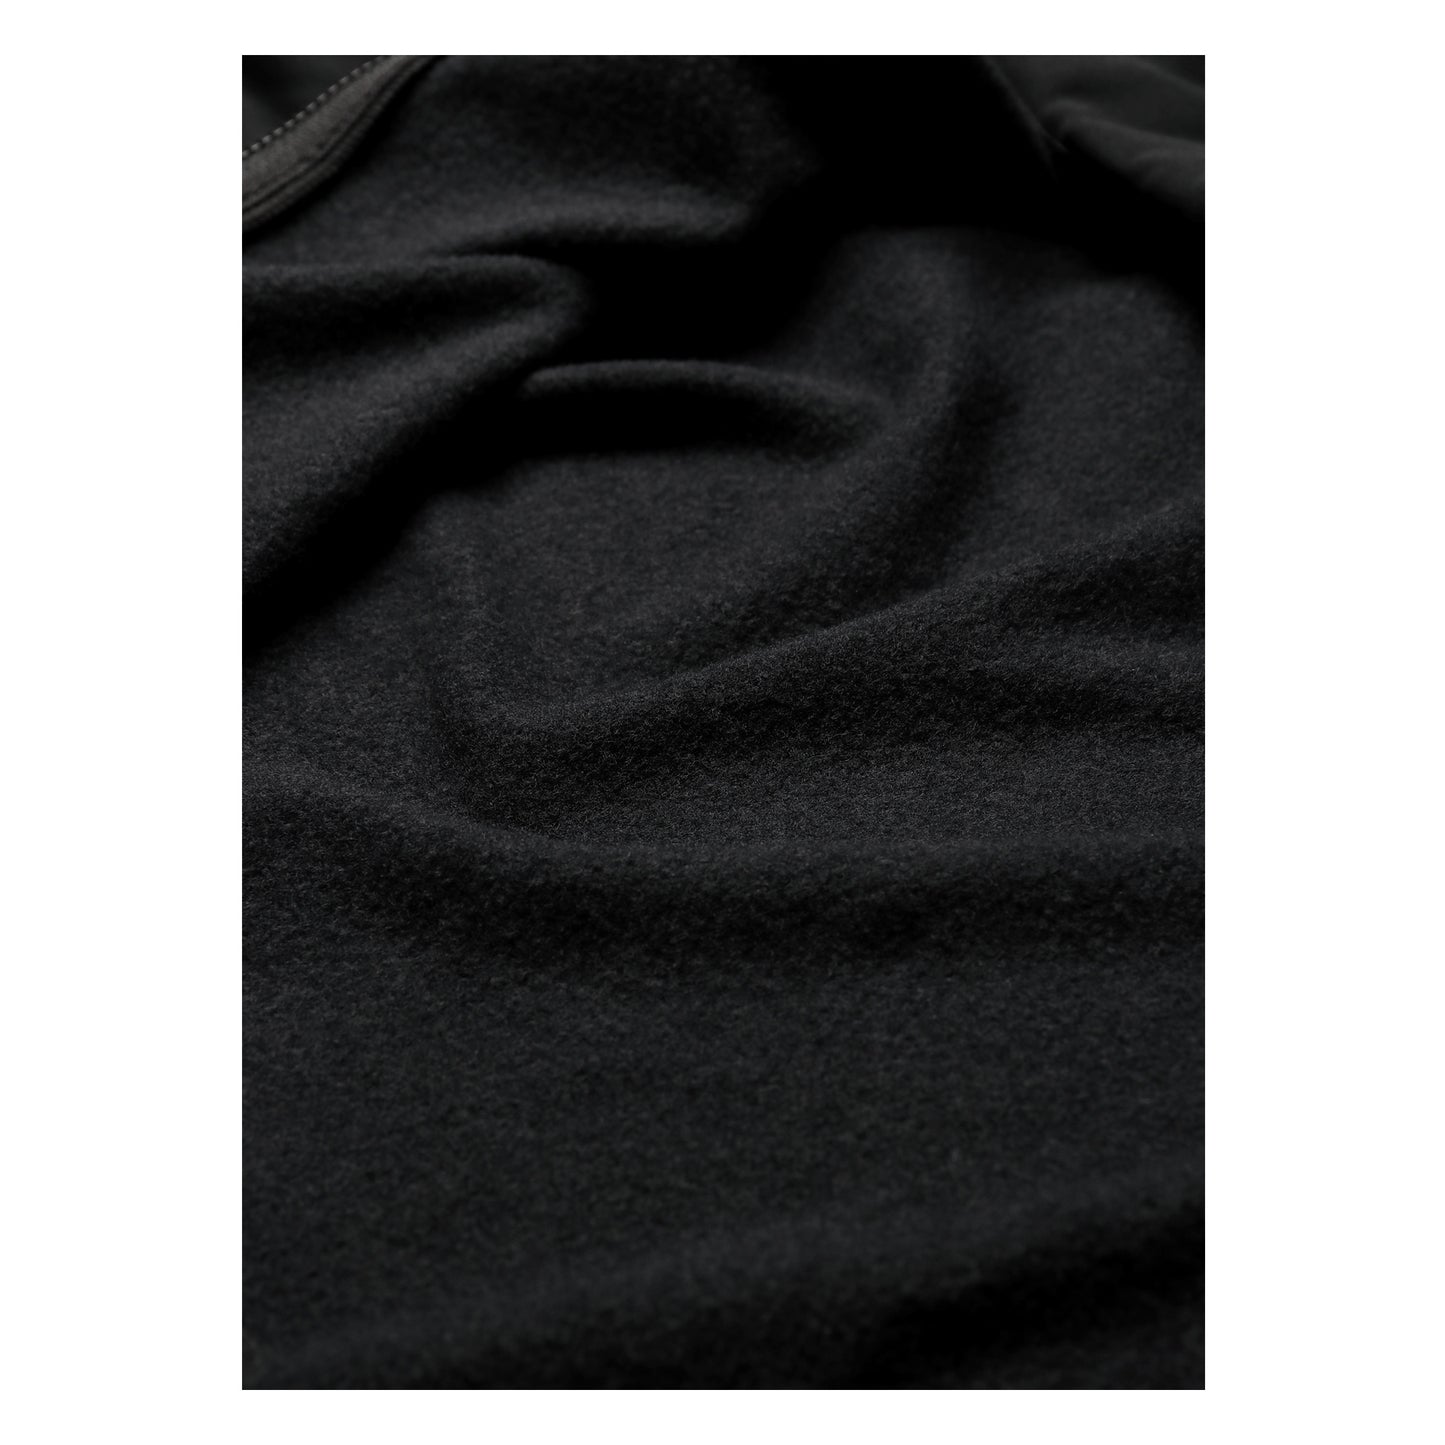 Milano Thermal Long Sleeve Jersey Black from Ascender Cycling Club Zürich Switzerland Four Way Stretch Thermal Fleece Italian Fabric View